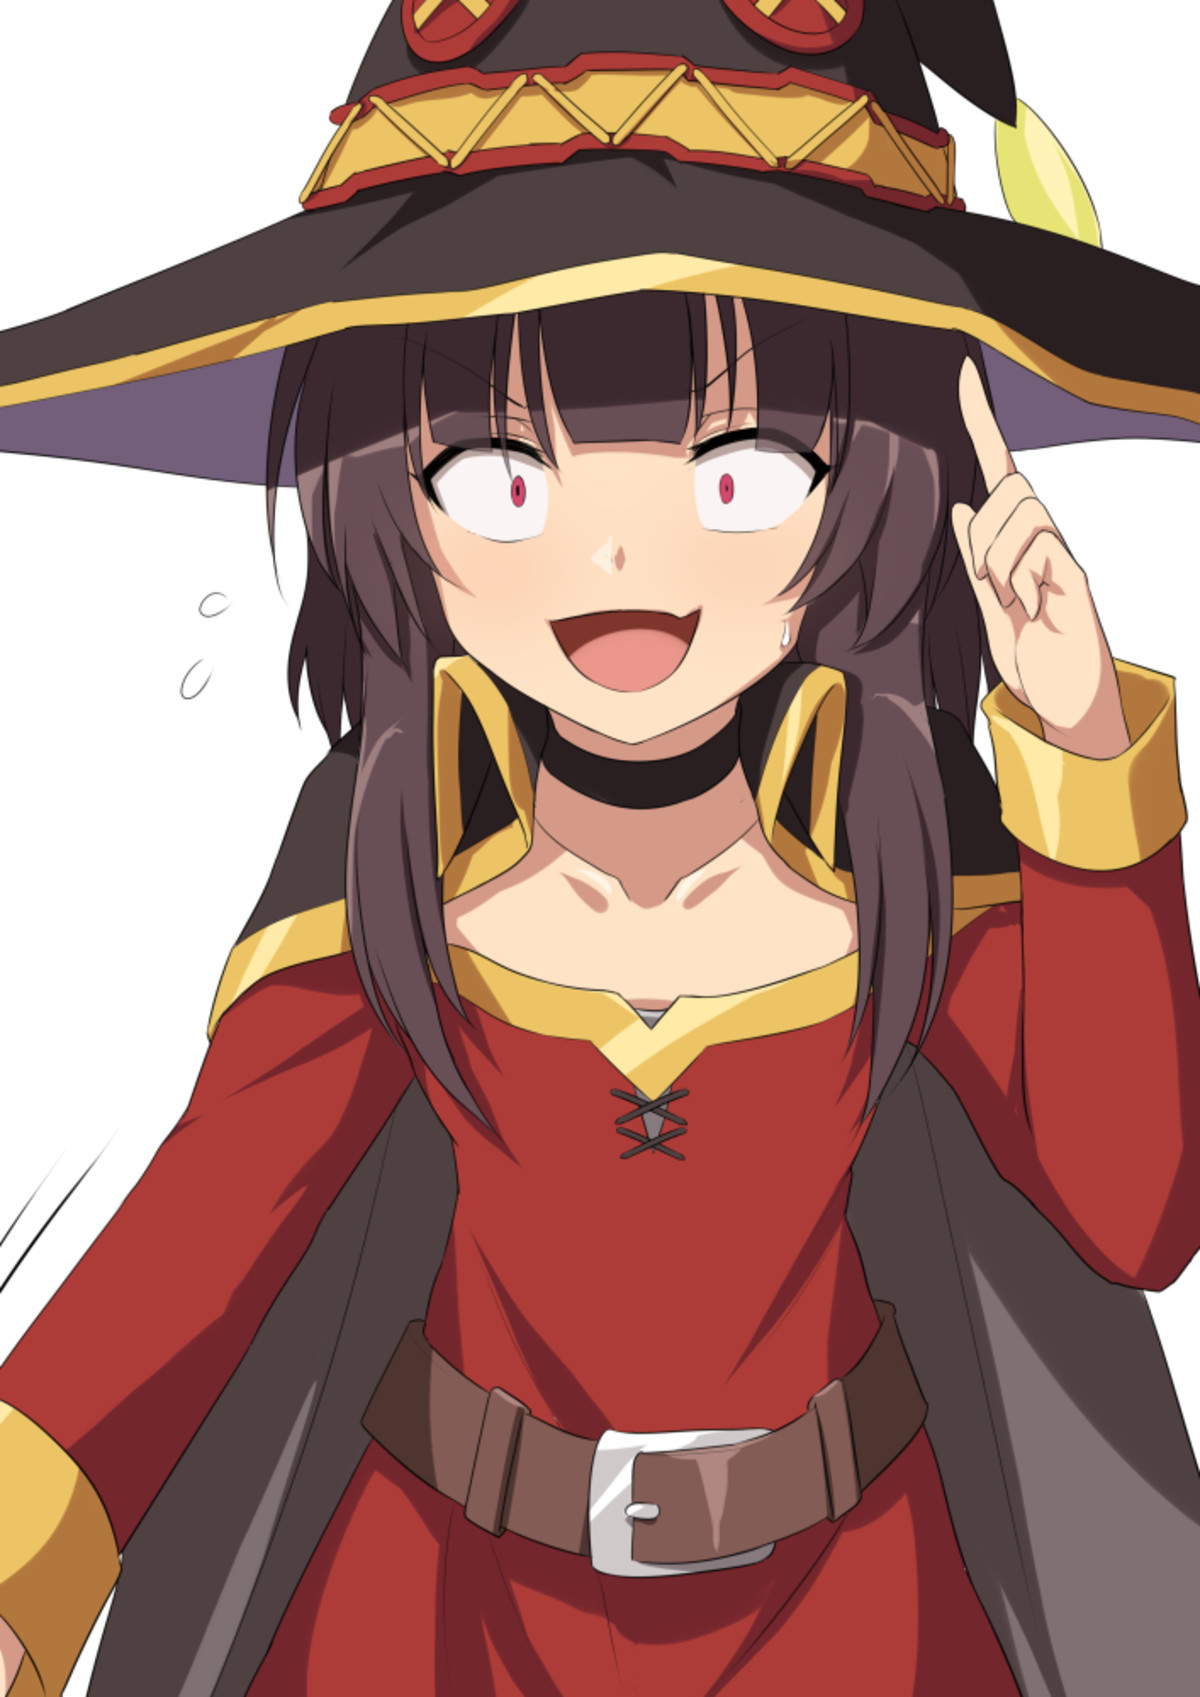 Daily Megu - 1142: Megu has a great idea. join list: DailySplosion (826 subs)Mention History Source: .. NO THE SHE DOES NOT